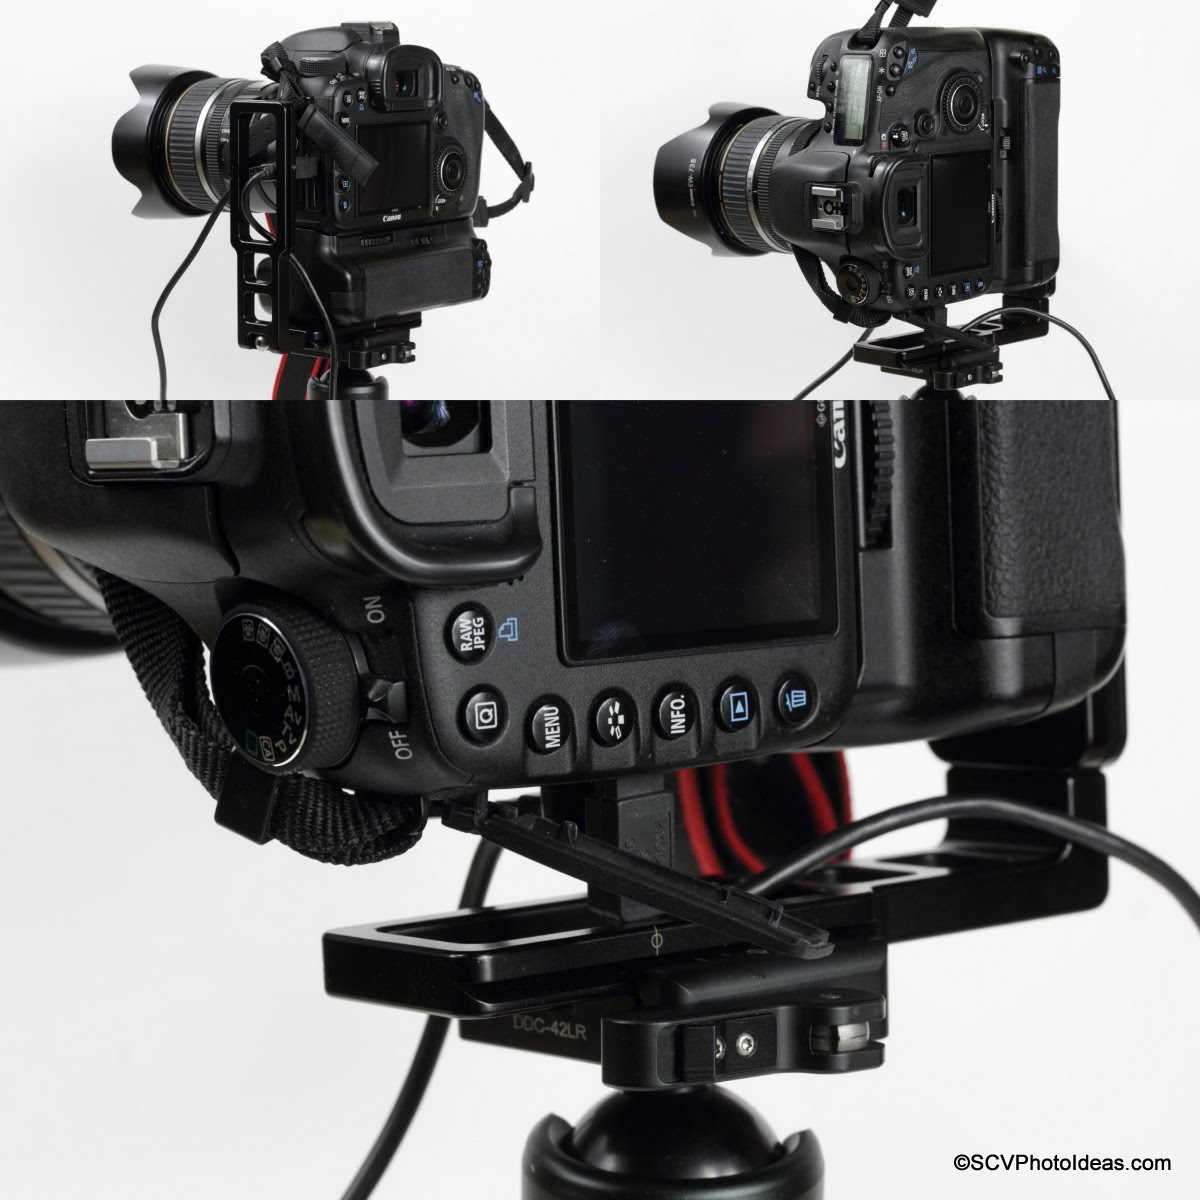 Hejnar L Bracket 44 on Gripped Canon EOS 7D - shifted with cable plugs